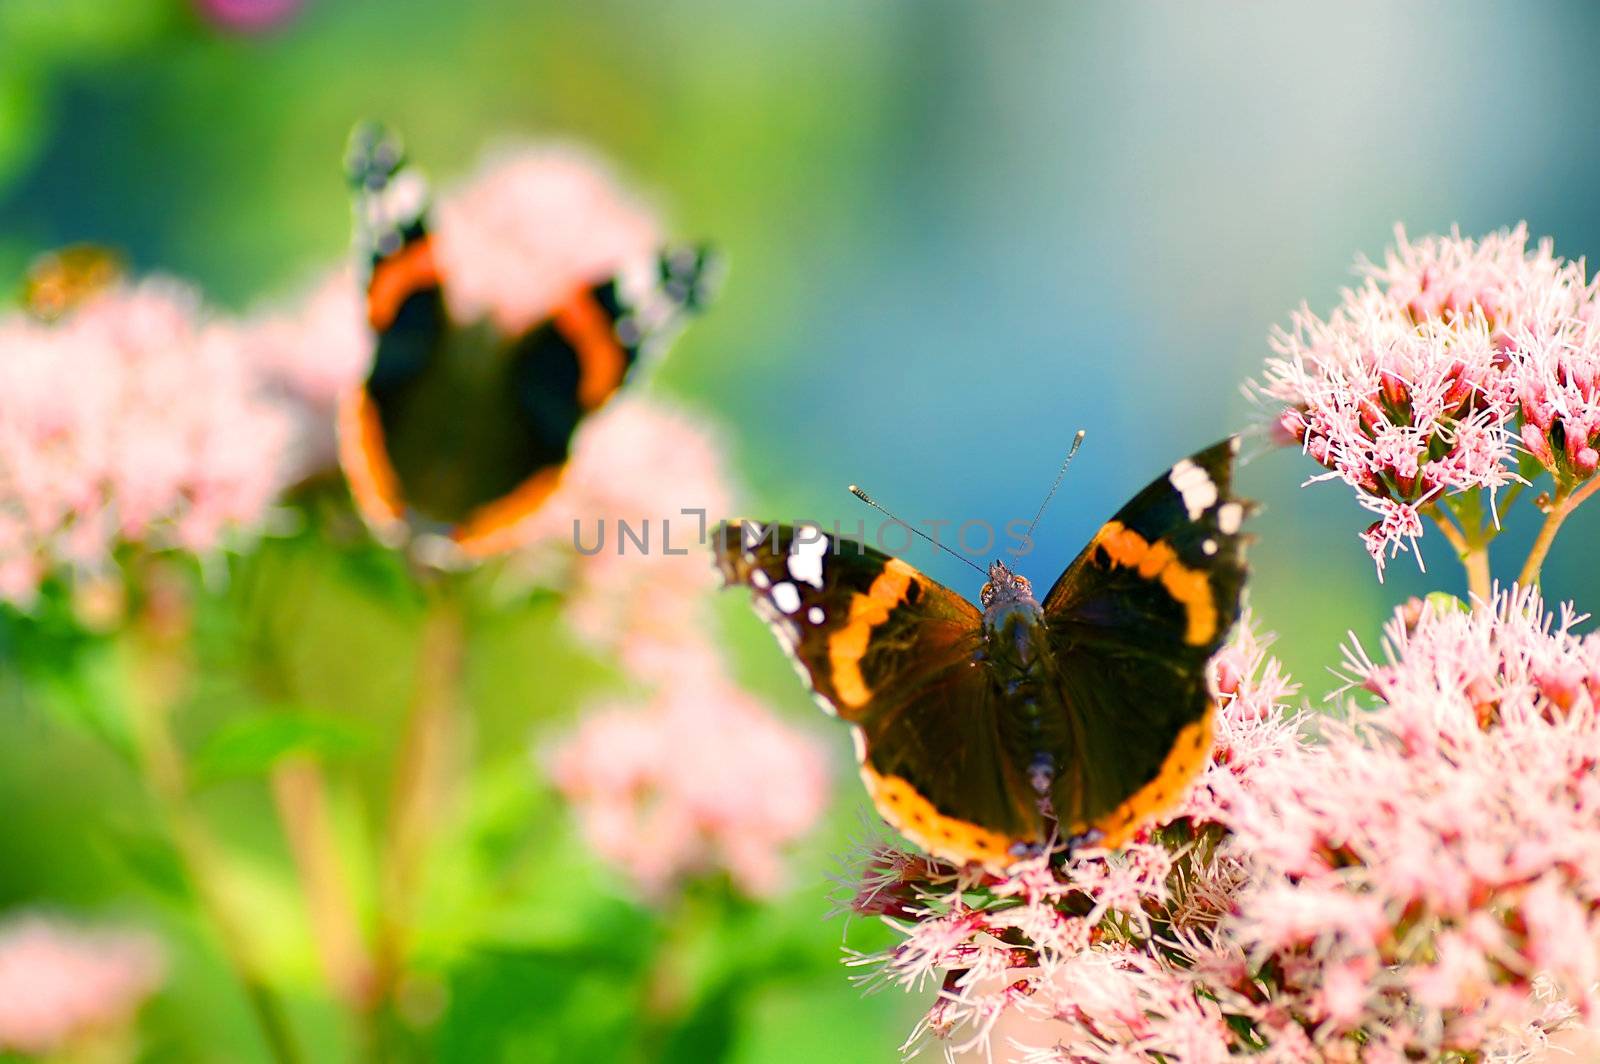 Butterfly by photocreo